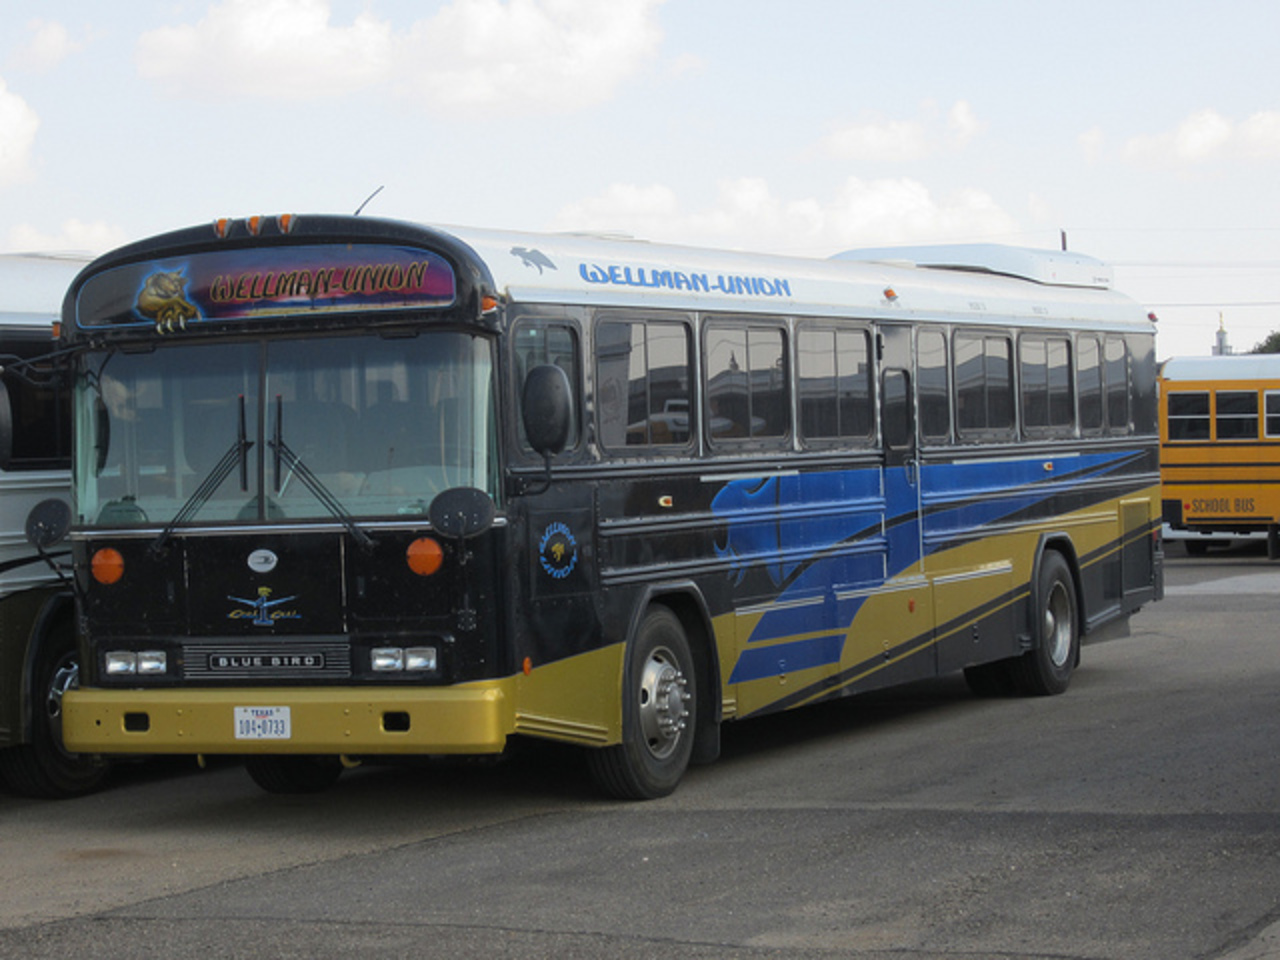 Flickr: The Blue Bird Buses Pool